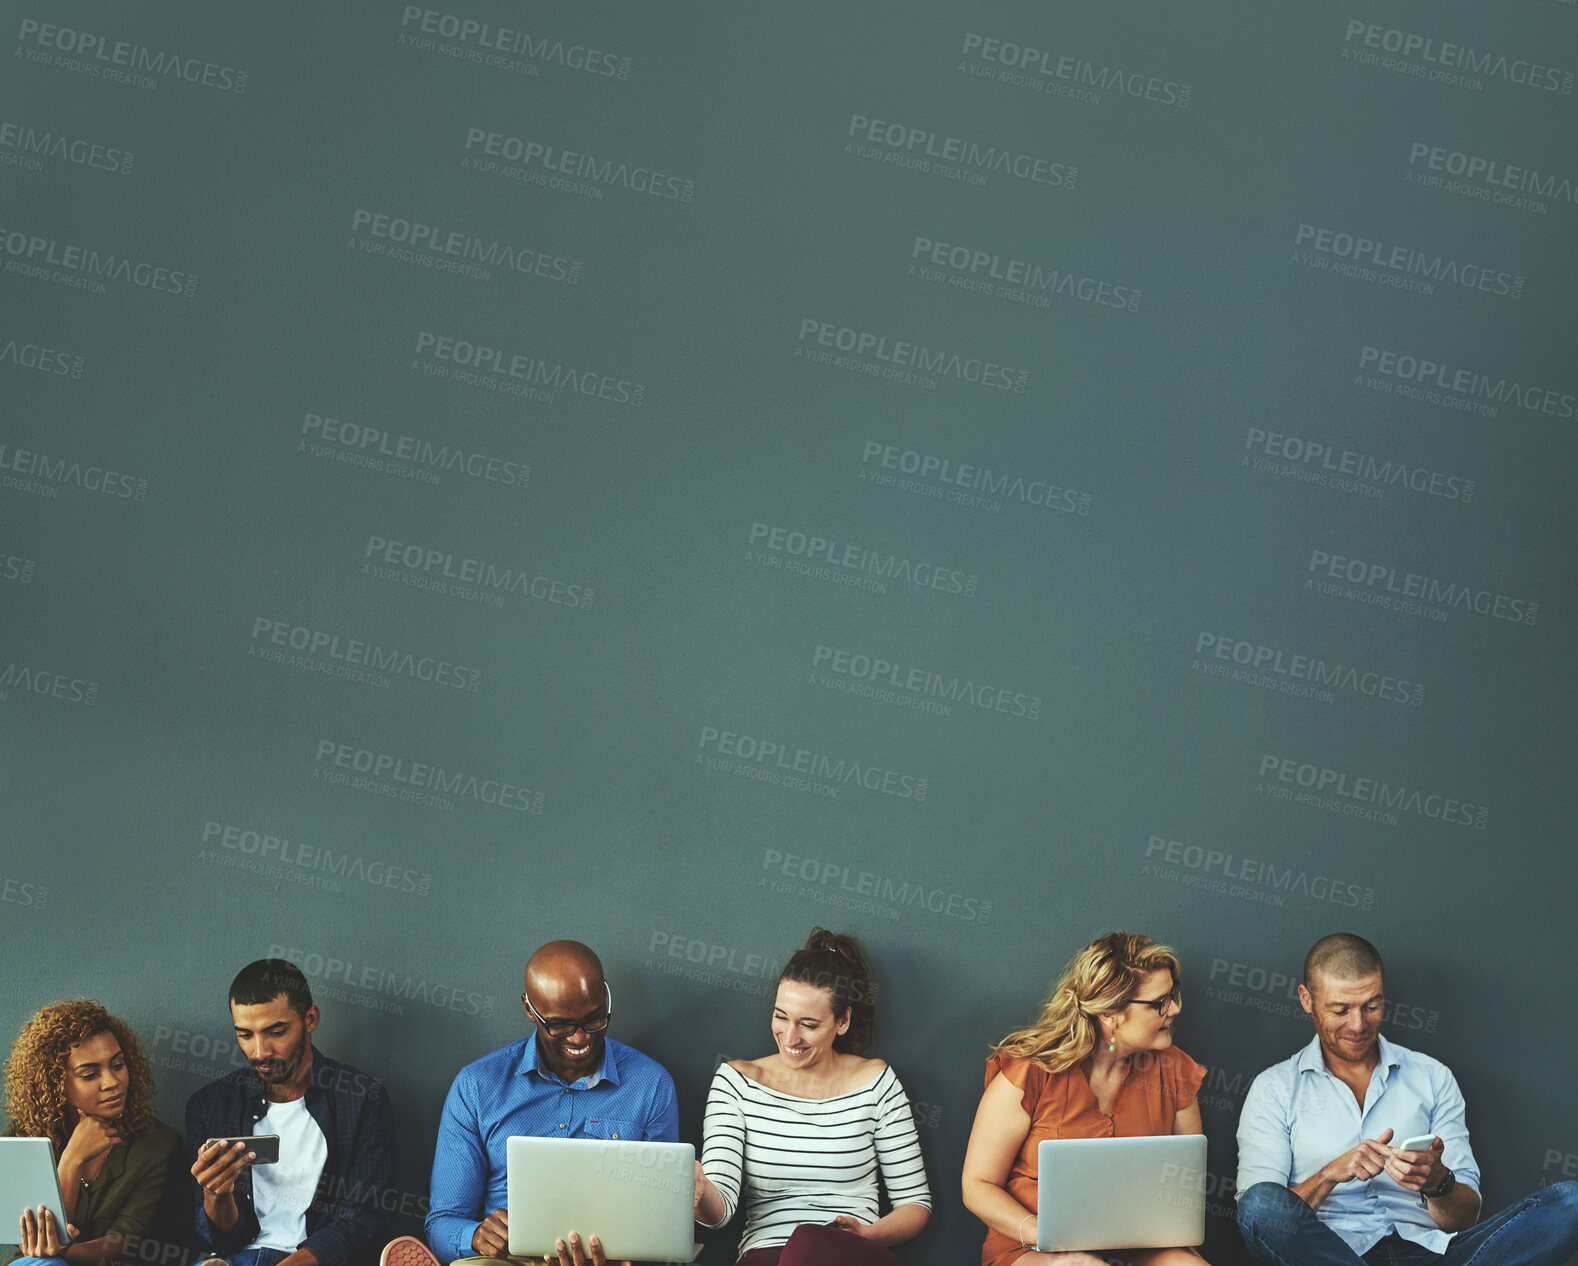 Buy stock photo Studio shot of a diverse group of people social networking against a gray background